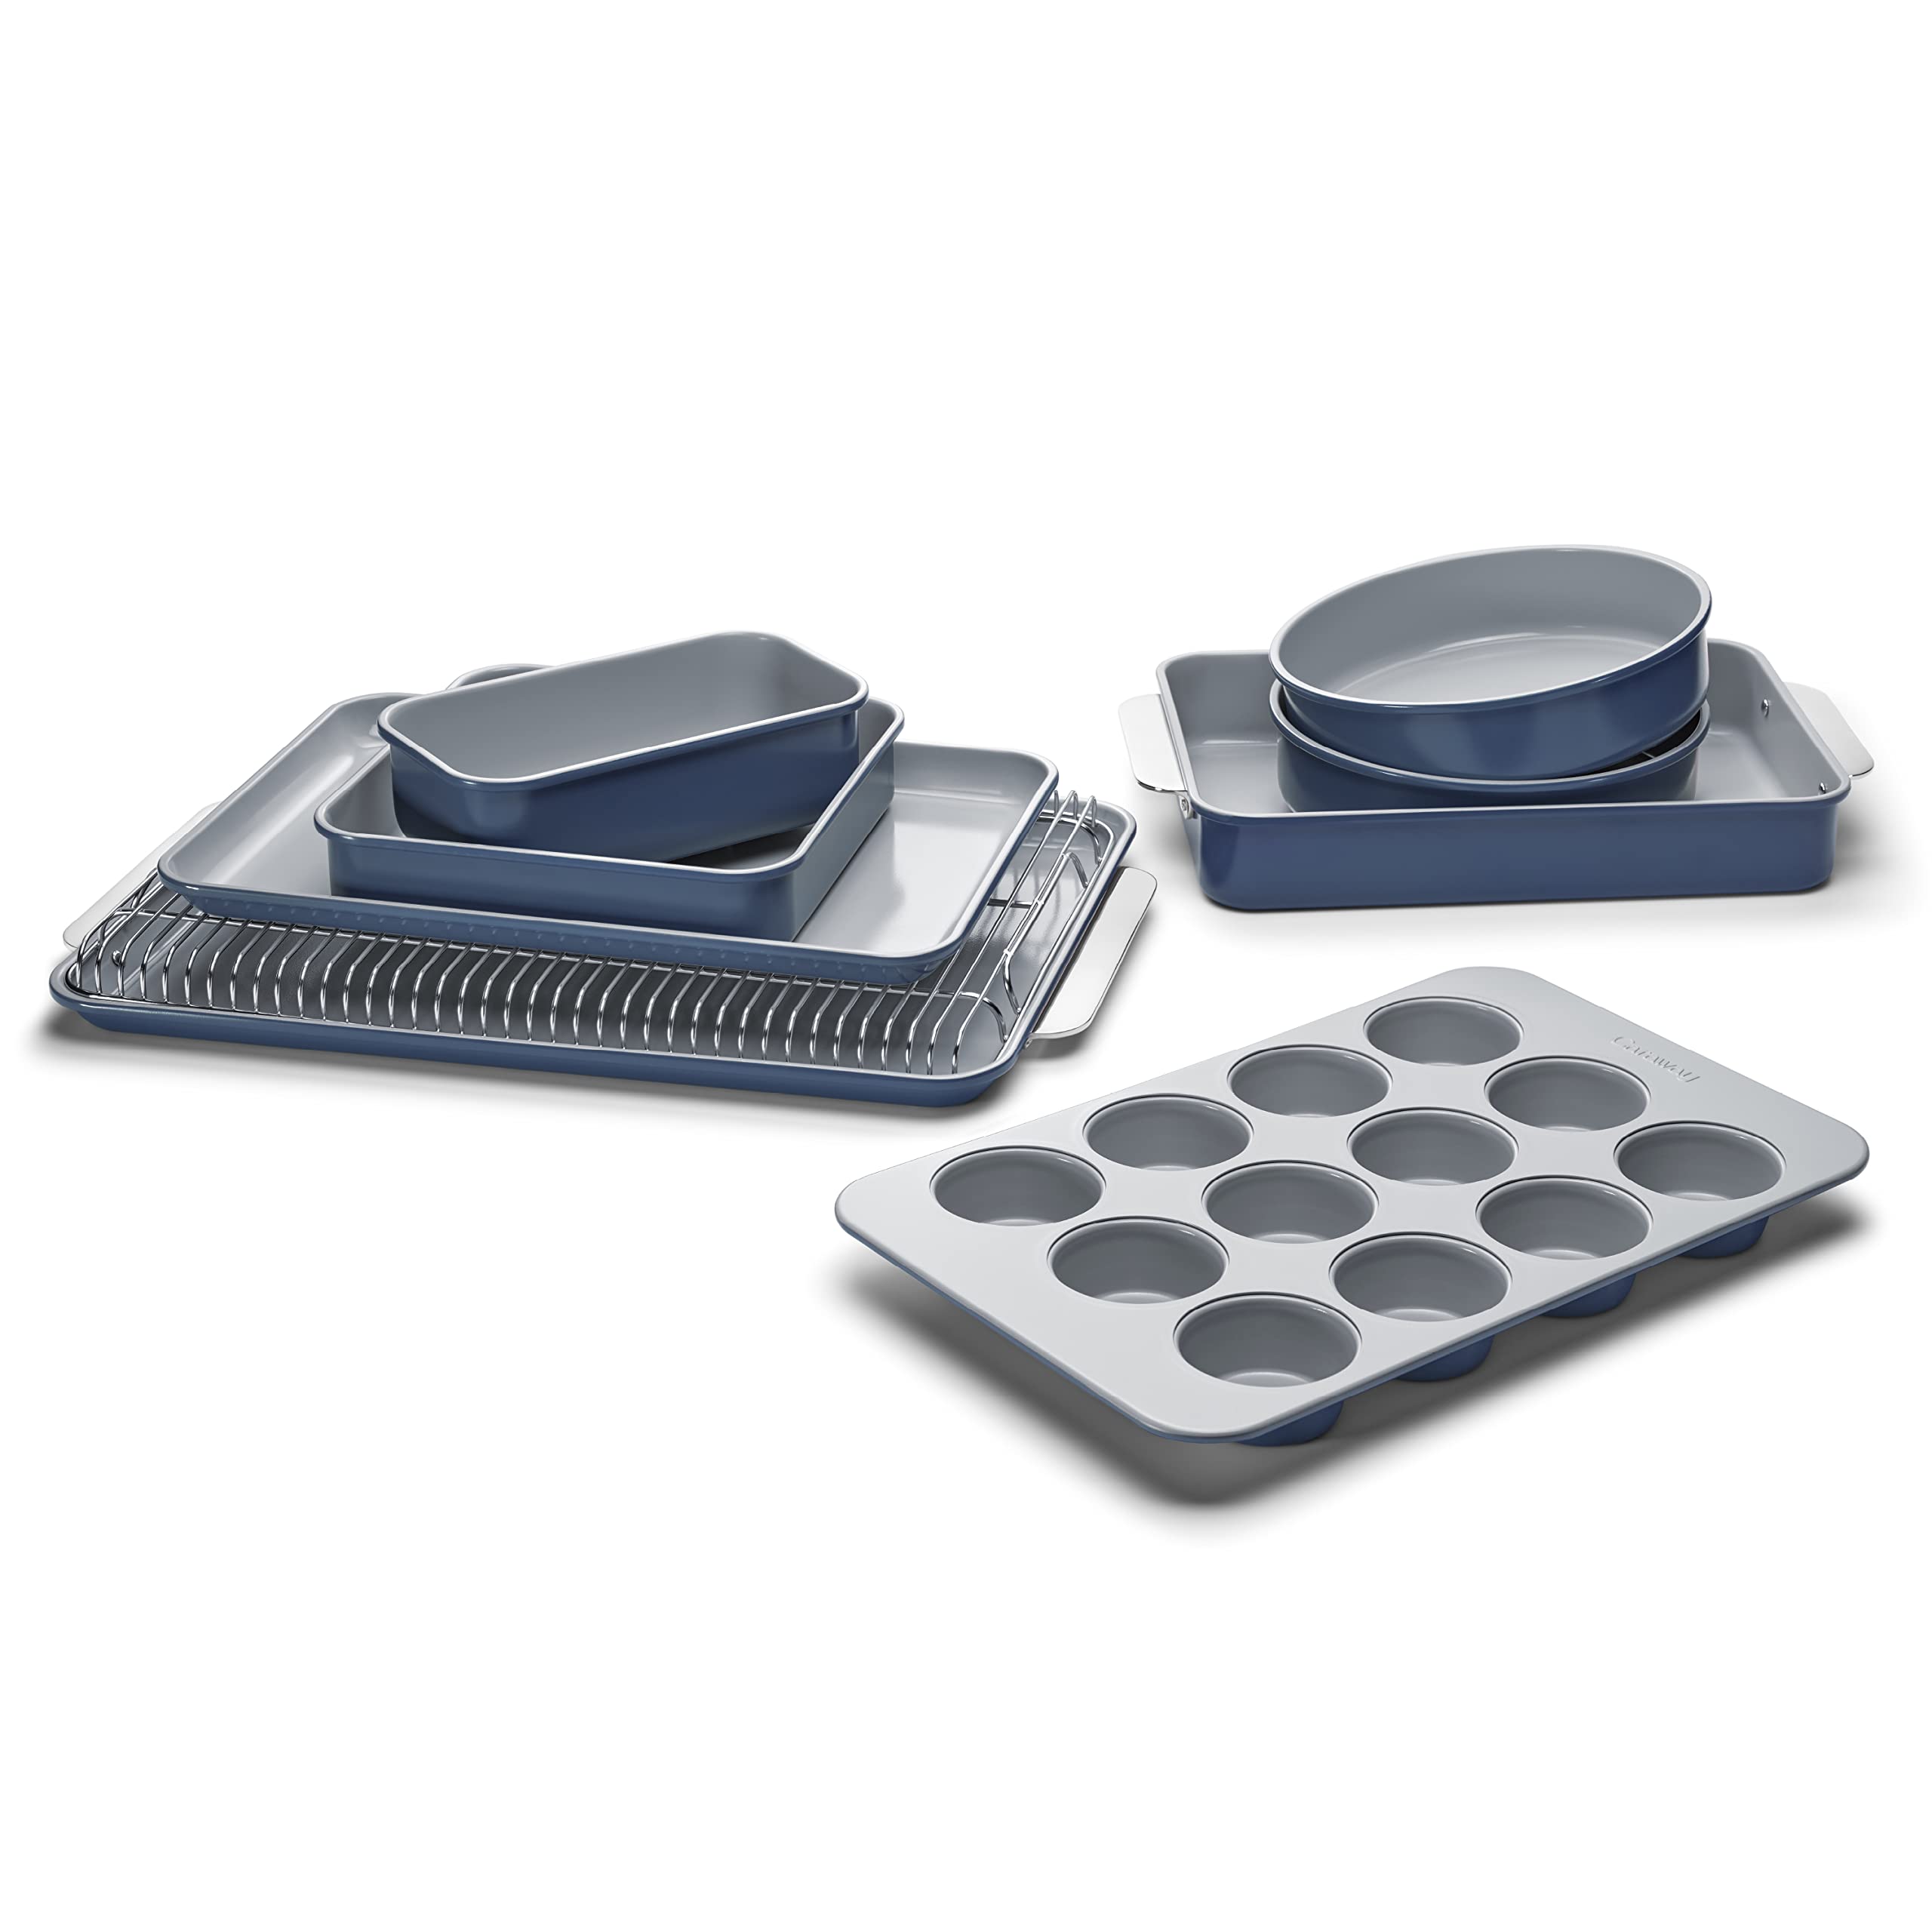 Caraway Nonstick Ceramic Bakeware Set (11 Pieces) - Baking Sheets, Assorted Baking Pans, Cooling Rack, & Storage - Aluminized Steel Body - Non Toxic, PTFE & PFOA Free - Navy